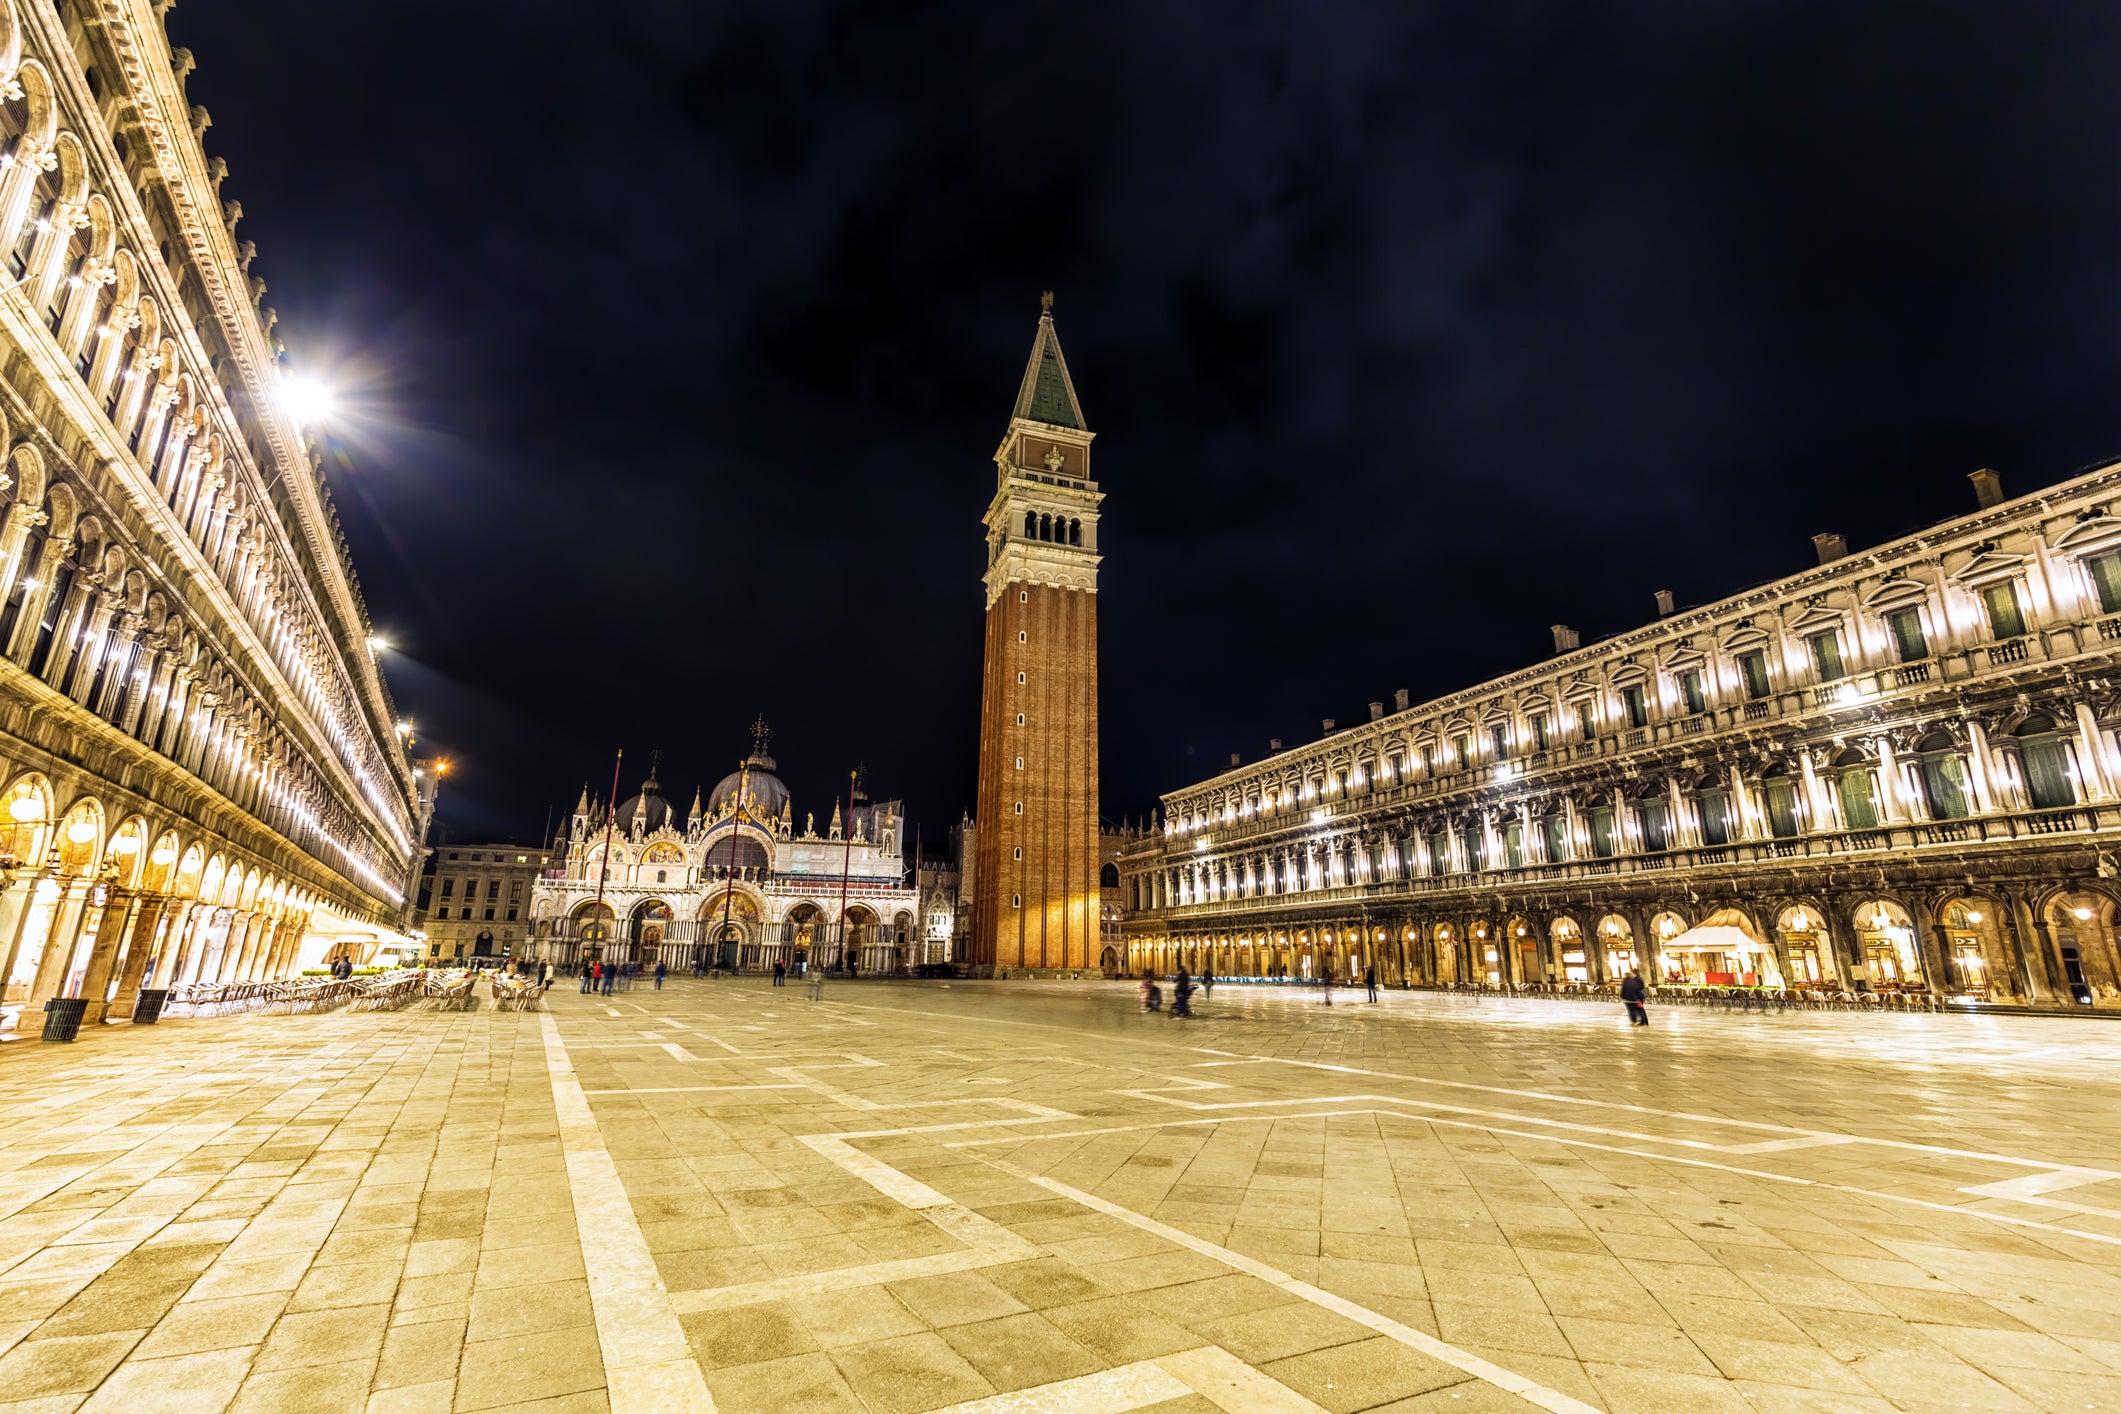 Don’t spend your whole trip in Piazza San Marco